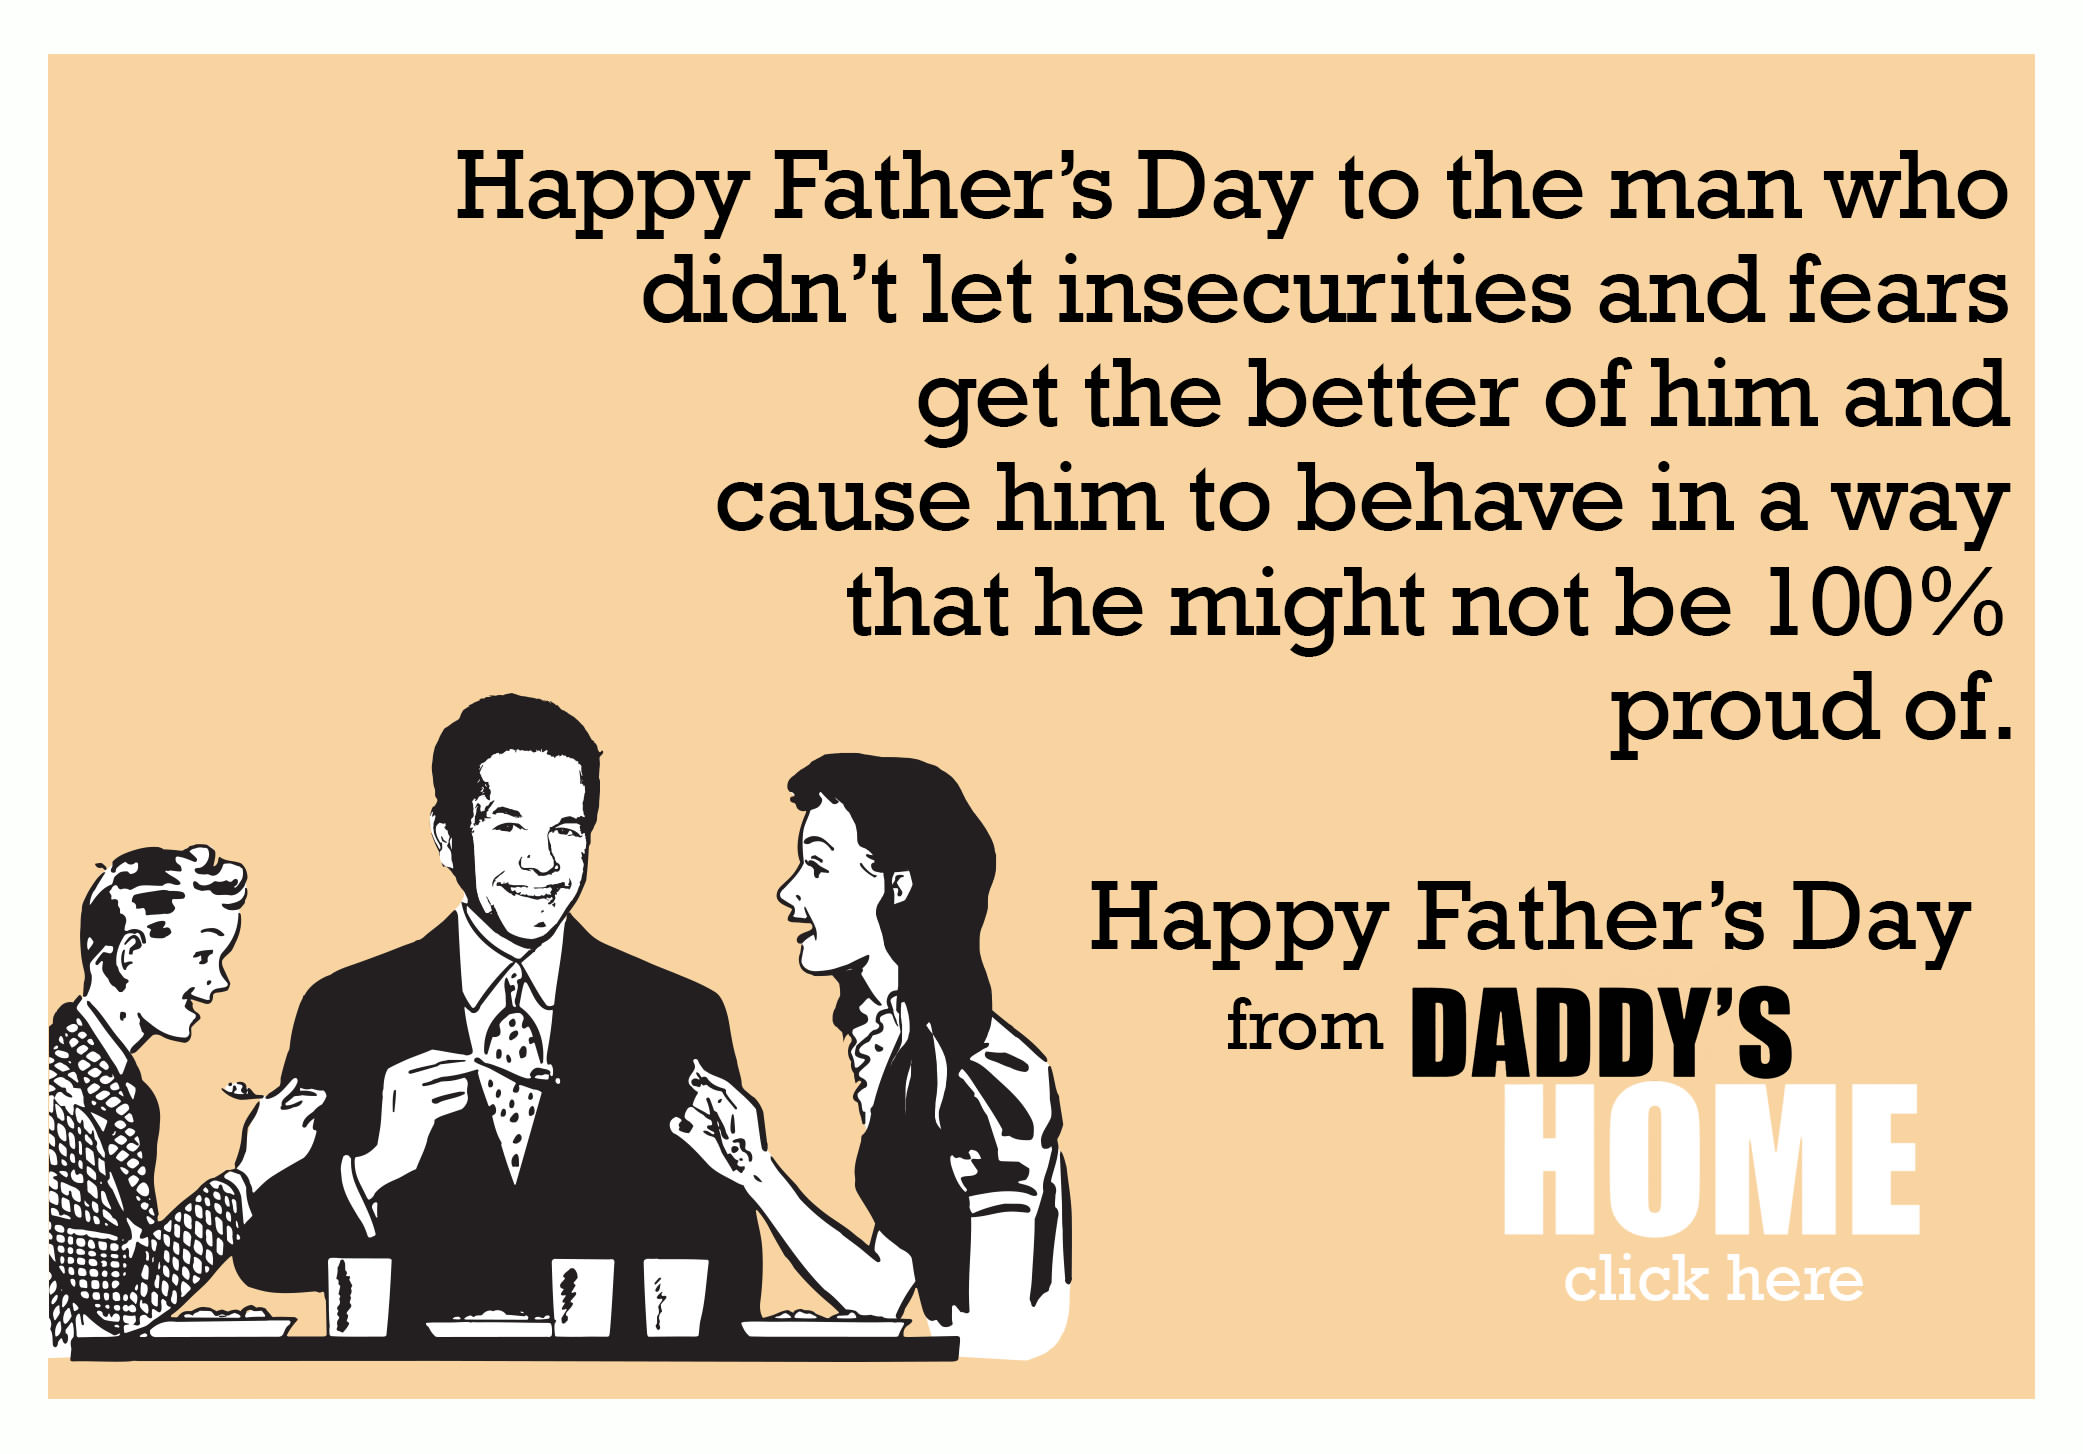 daddys-home-fathers-day-card-21